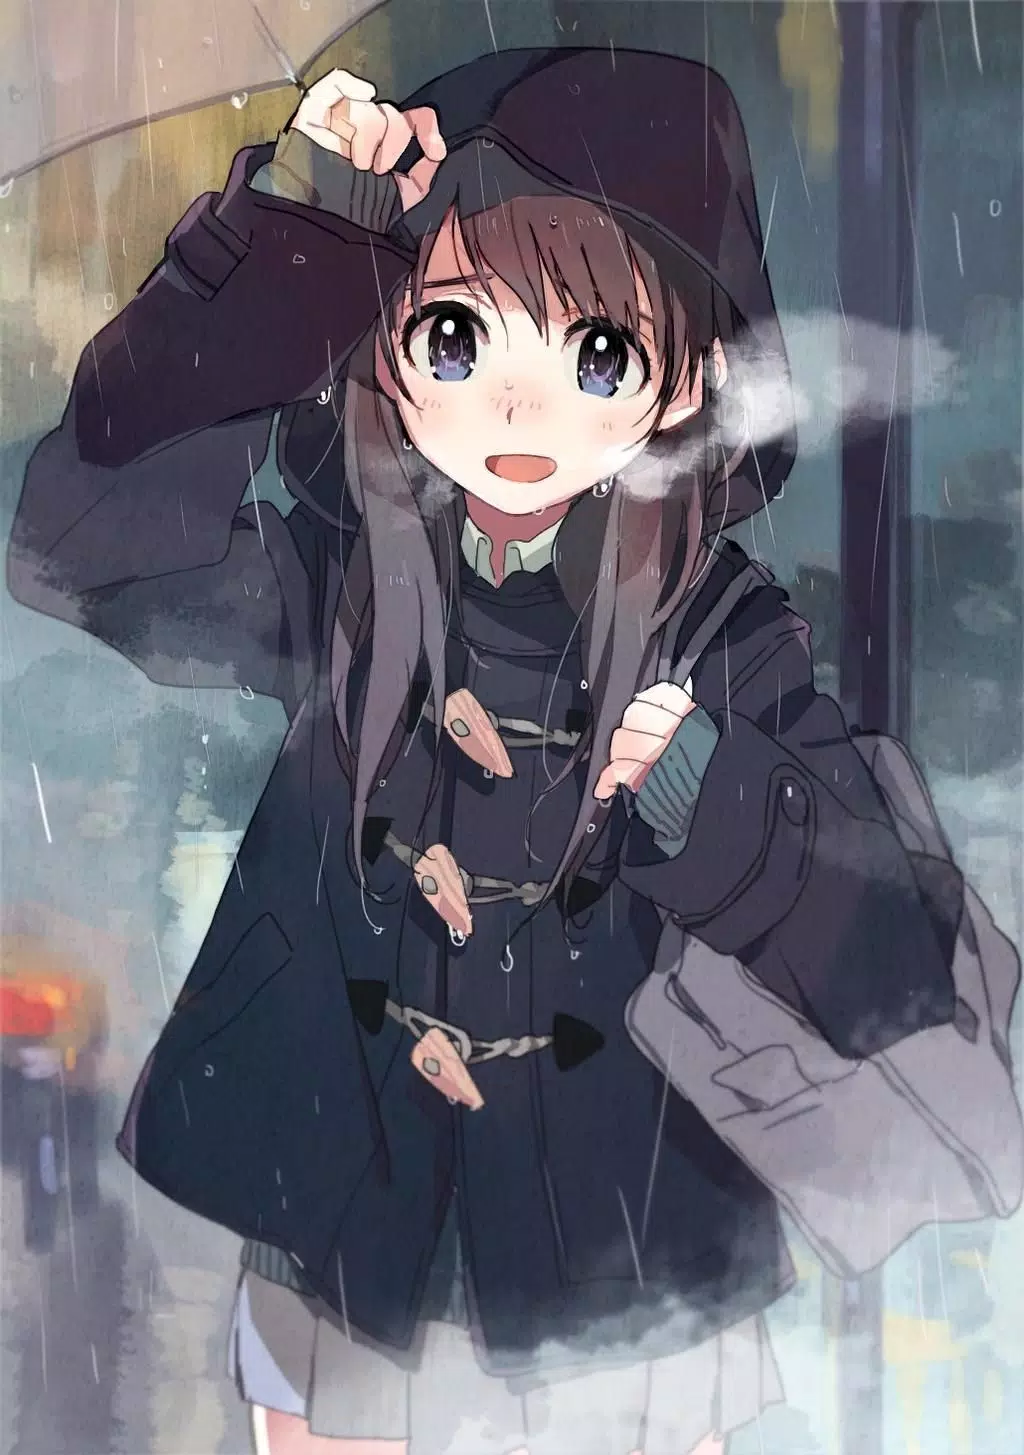 Cute Girly Anime Wallpaper: HD Kawaii Backgrounds APK + Mod for Android.